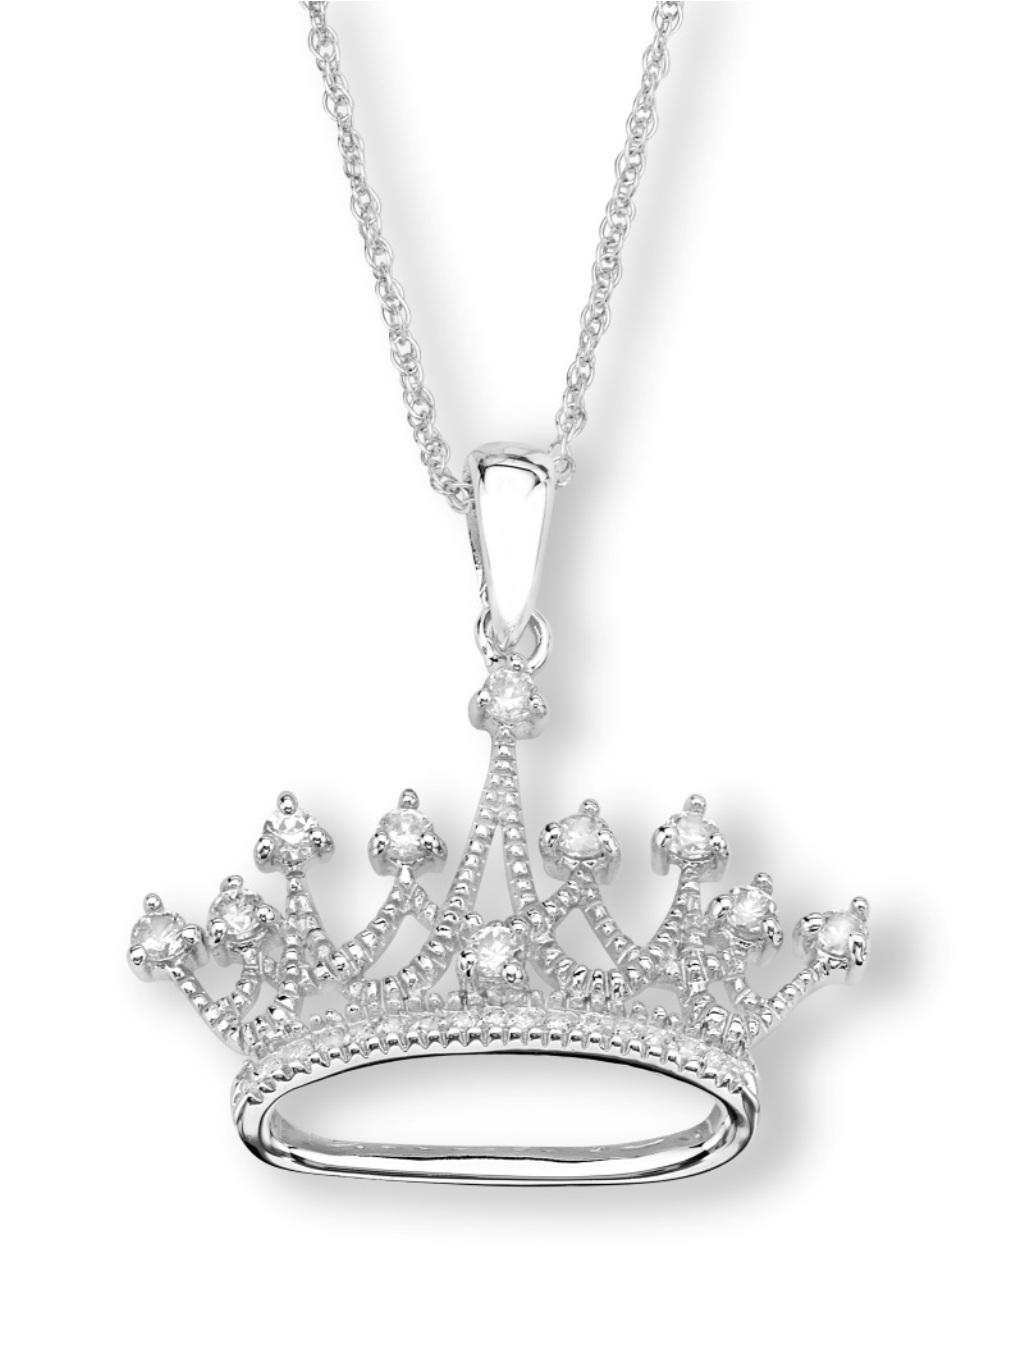  CZ Crown Pendant Necklace, Rhodium Plated Sterling Silver, 18